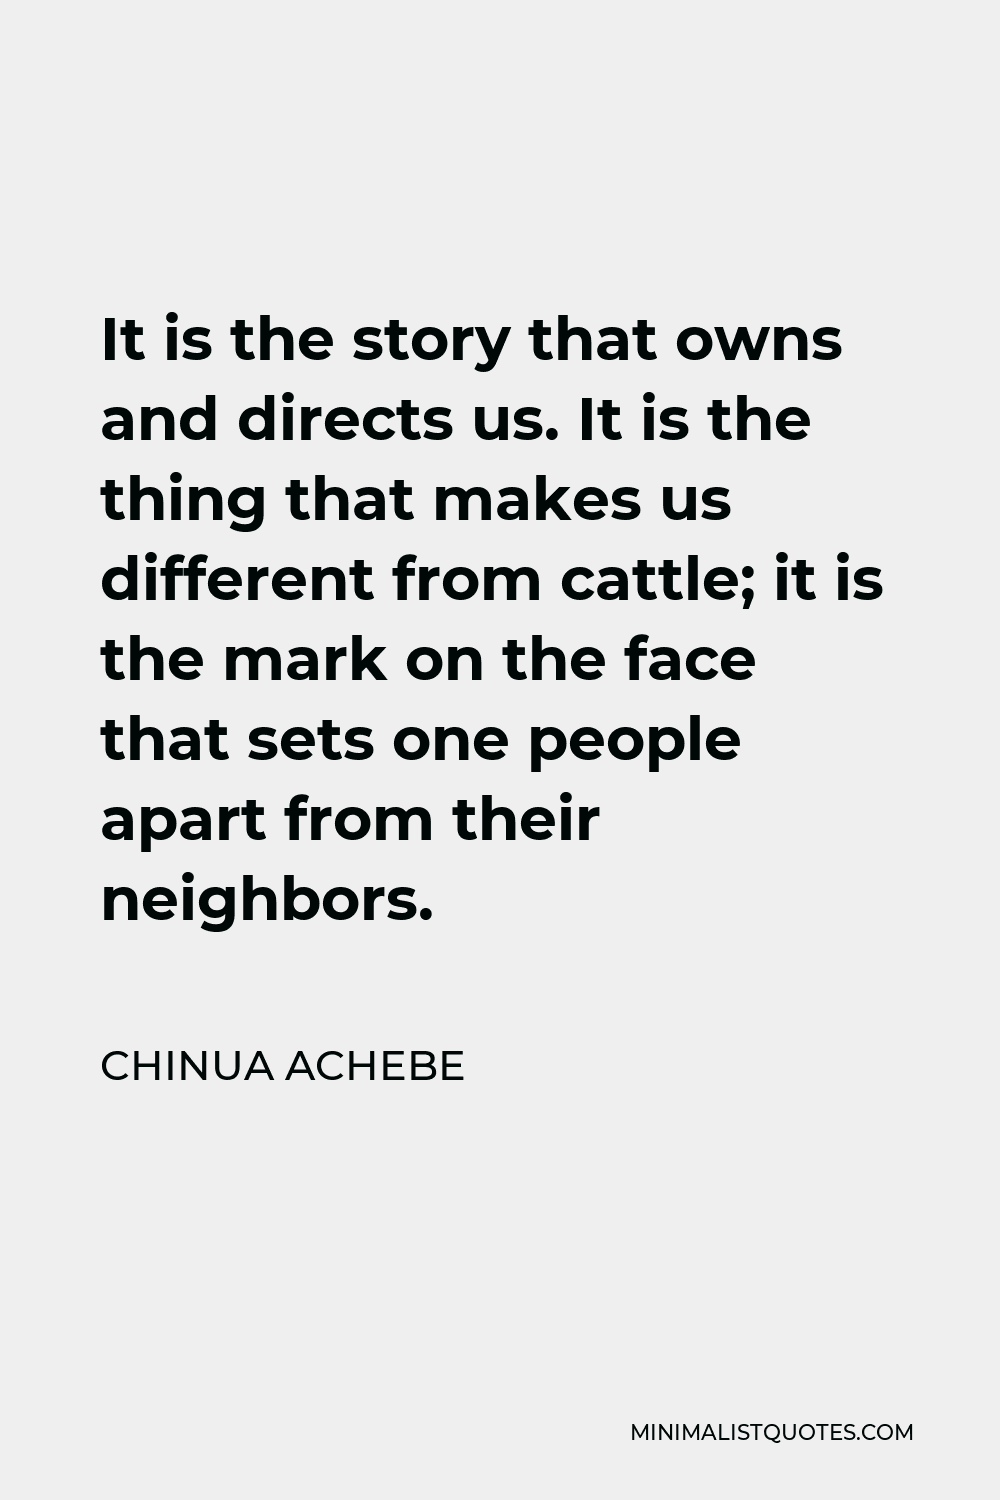 Chinua Achebe Quote - It is the story that owns and directs us. It is the thing that makes us different from cattle; it is the mark on the face that sets one people apart from their neighbors.